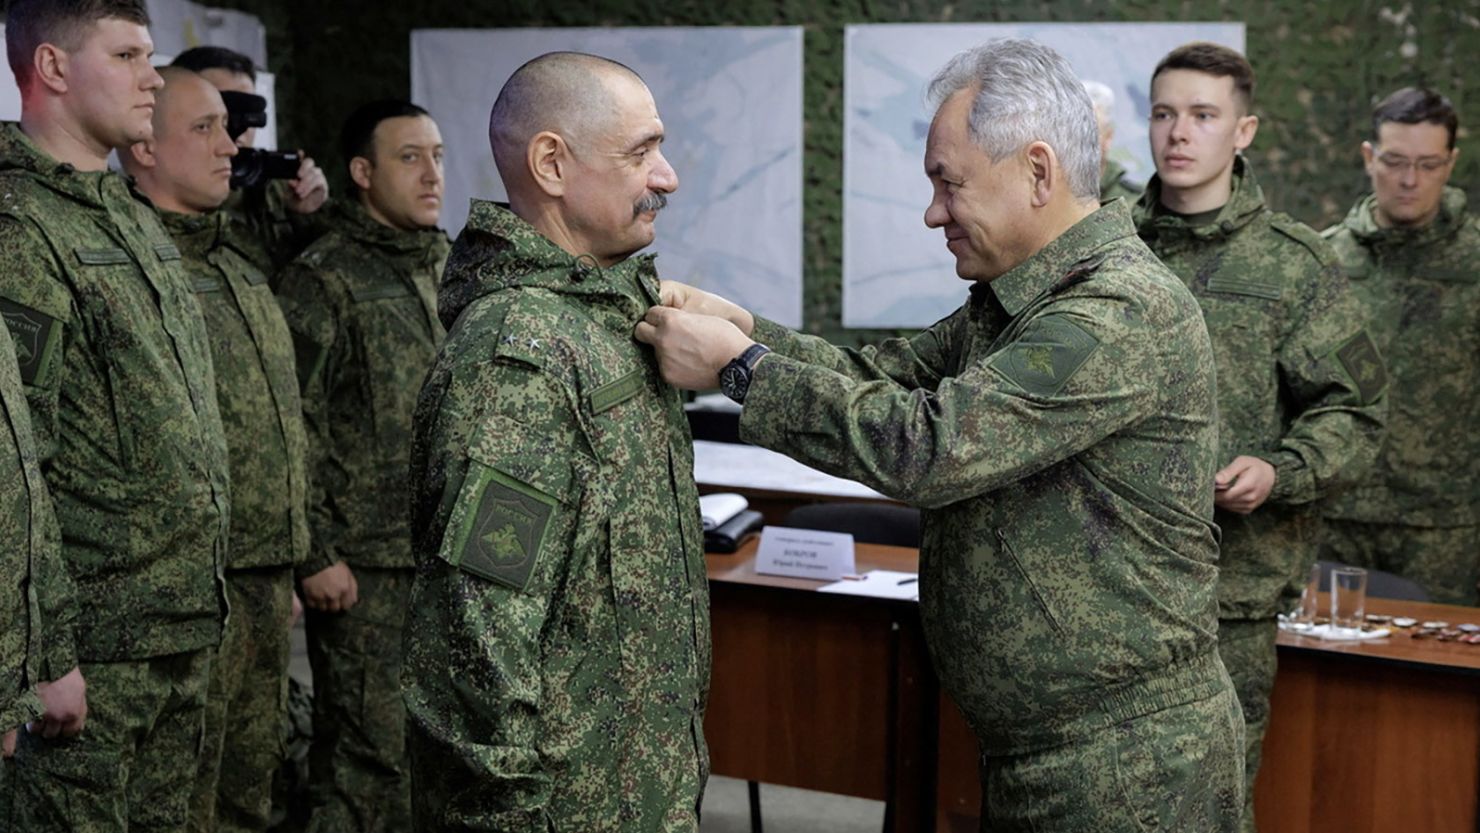 Russia's Defence Minister Sergei Shoigu awards service members during what the defence ministry said to be an inspection of a forward command post of Russian armed forces deployed in Ukraine, at an unknown location in the course of Russia-Ukraine conflict, in this handout image published March 4, 2023.